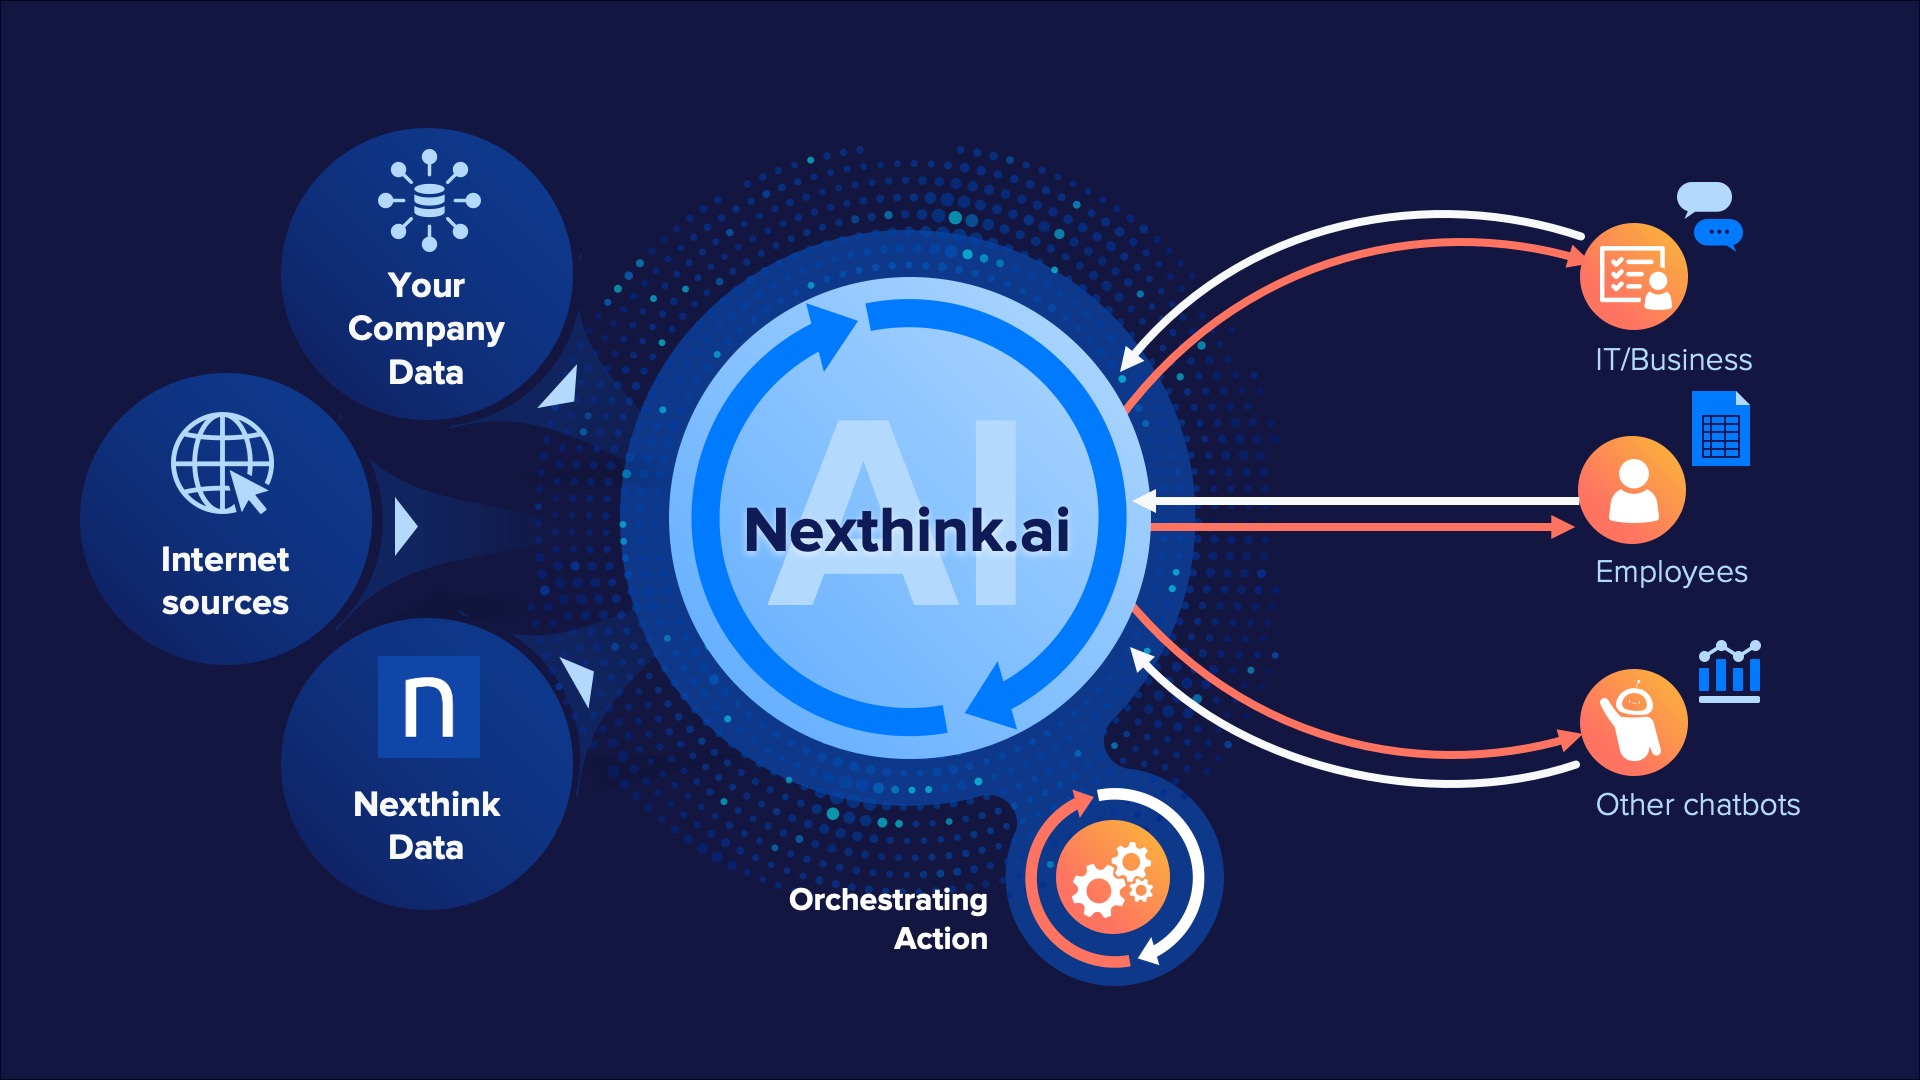 A slide design from the Nexthink Experience everywhere event. It shows the structure of the Nexthink A. I.